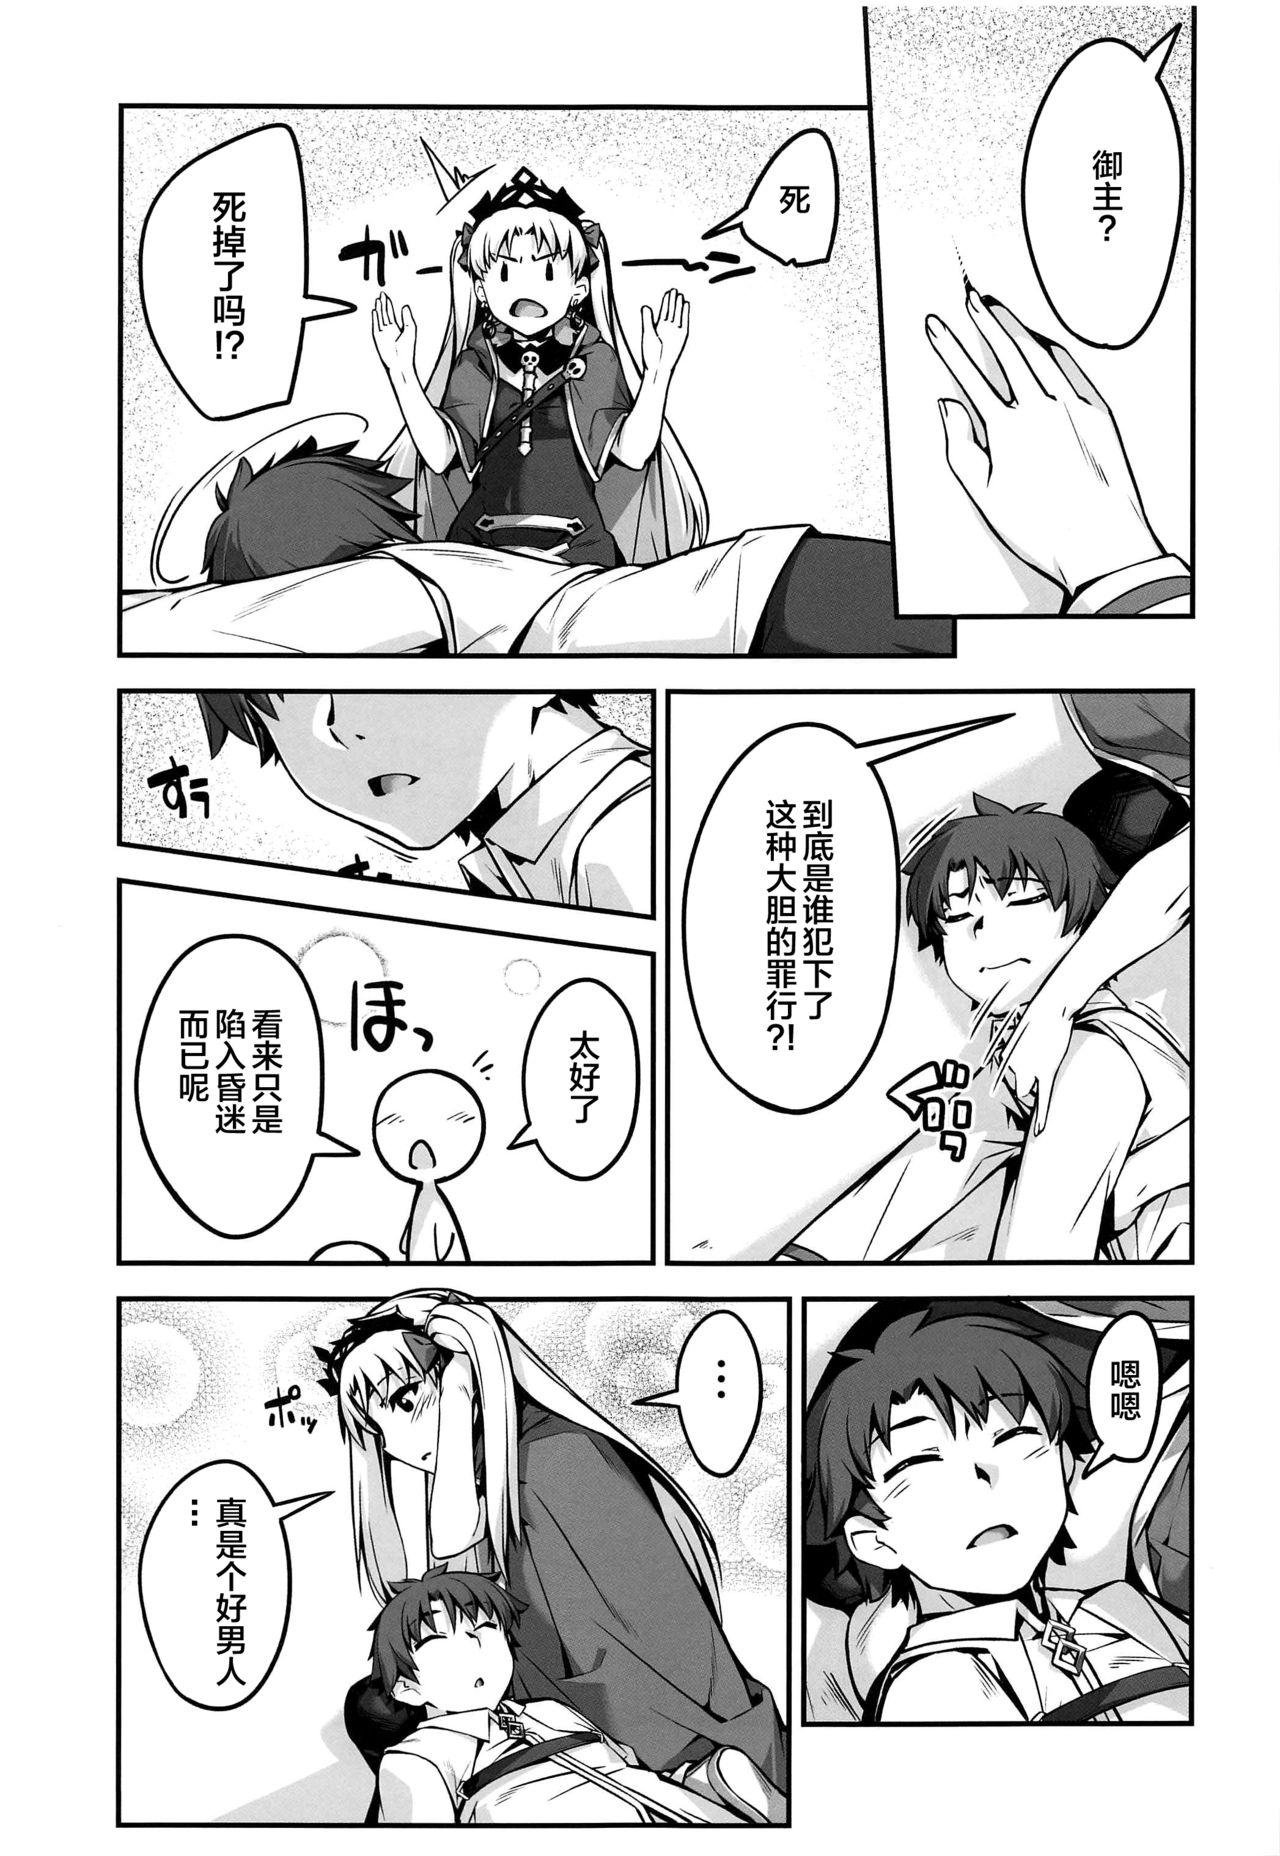 Doggystyle Hiroigui. - Fate grand order Fat - Page 4